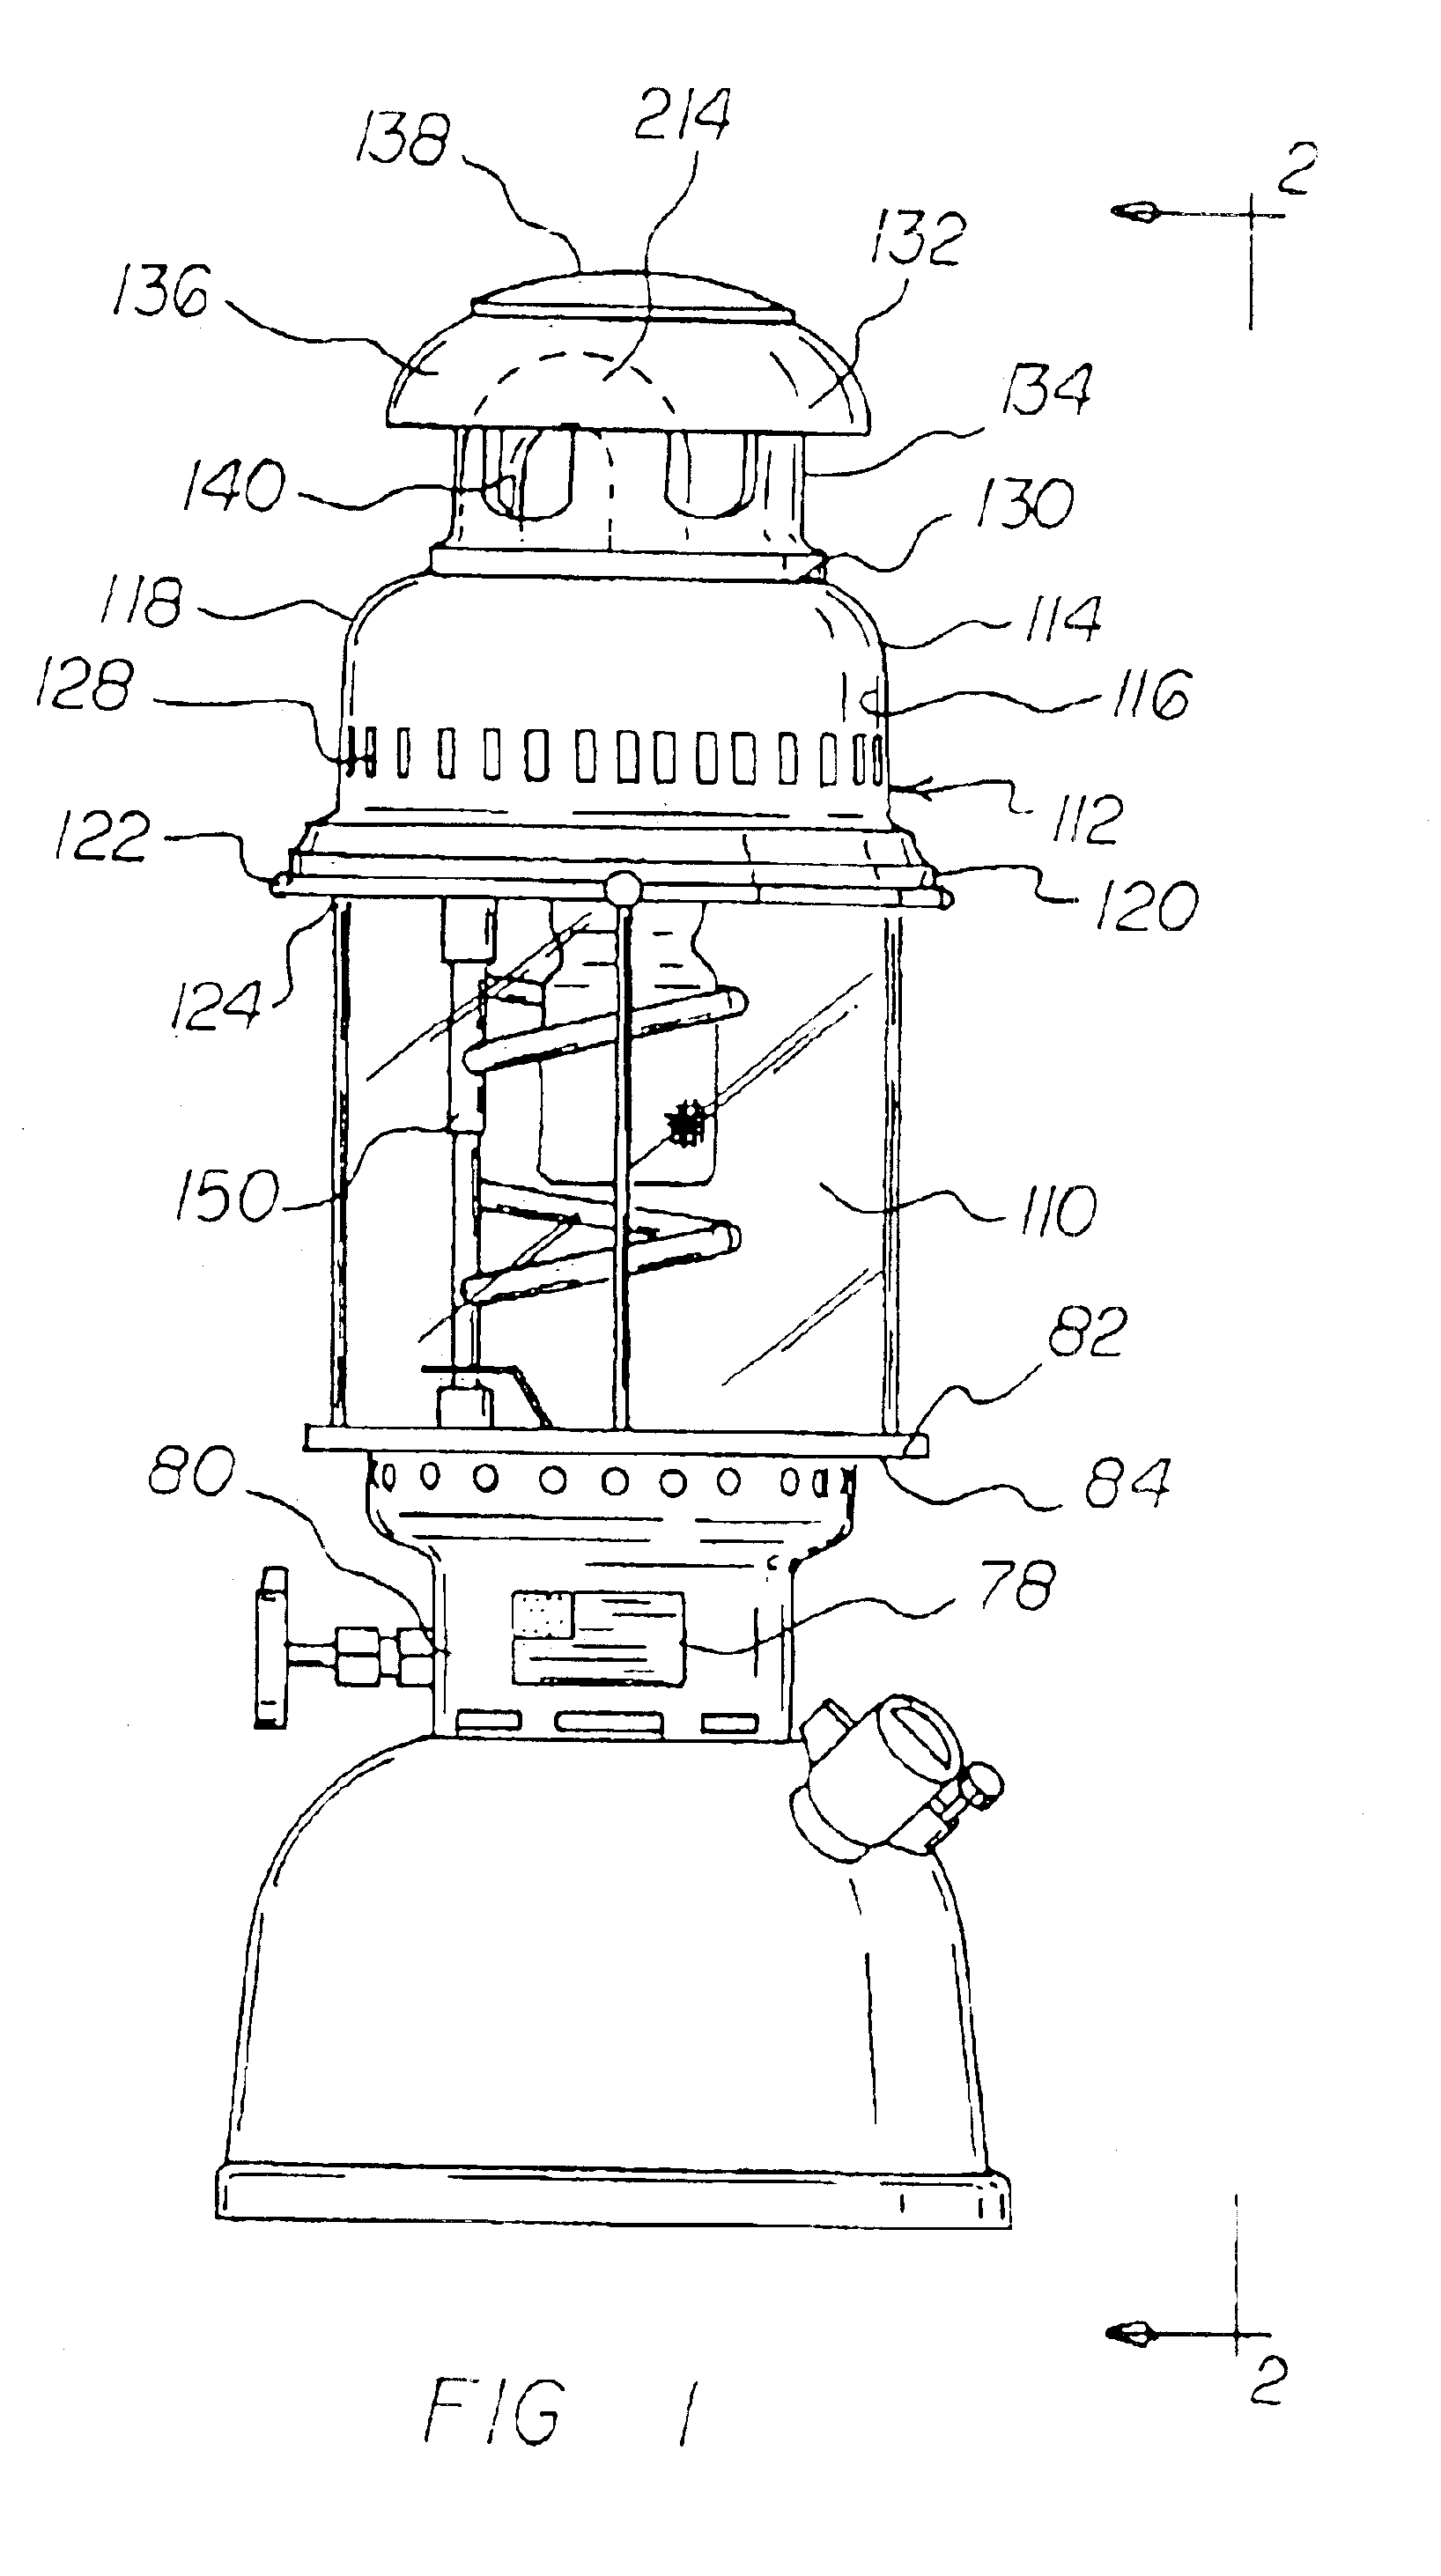 Lantern and fuel system